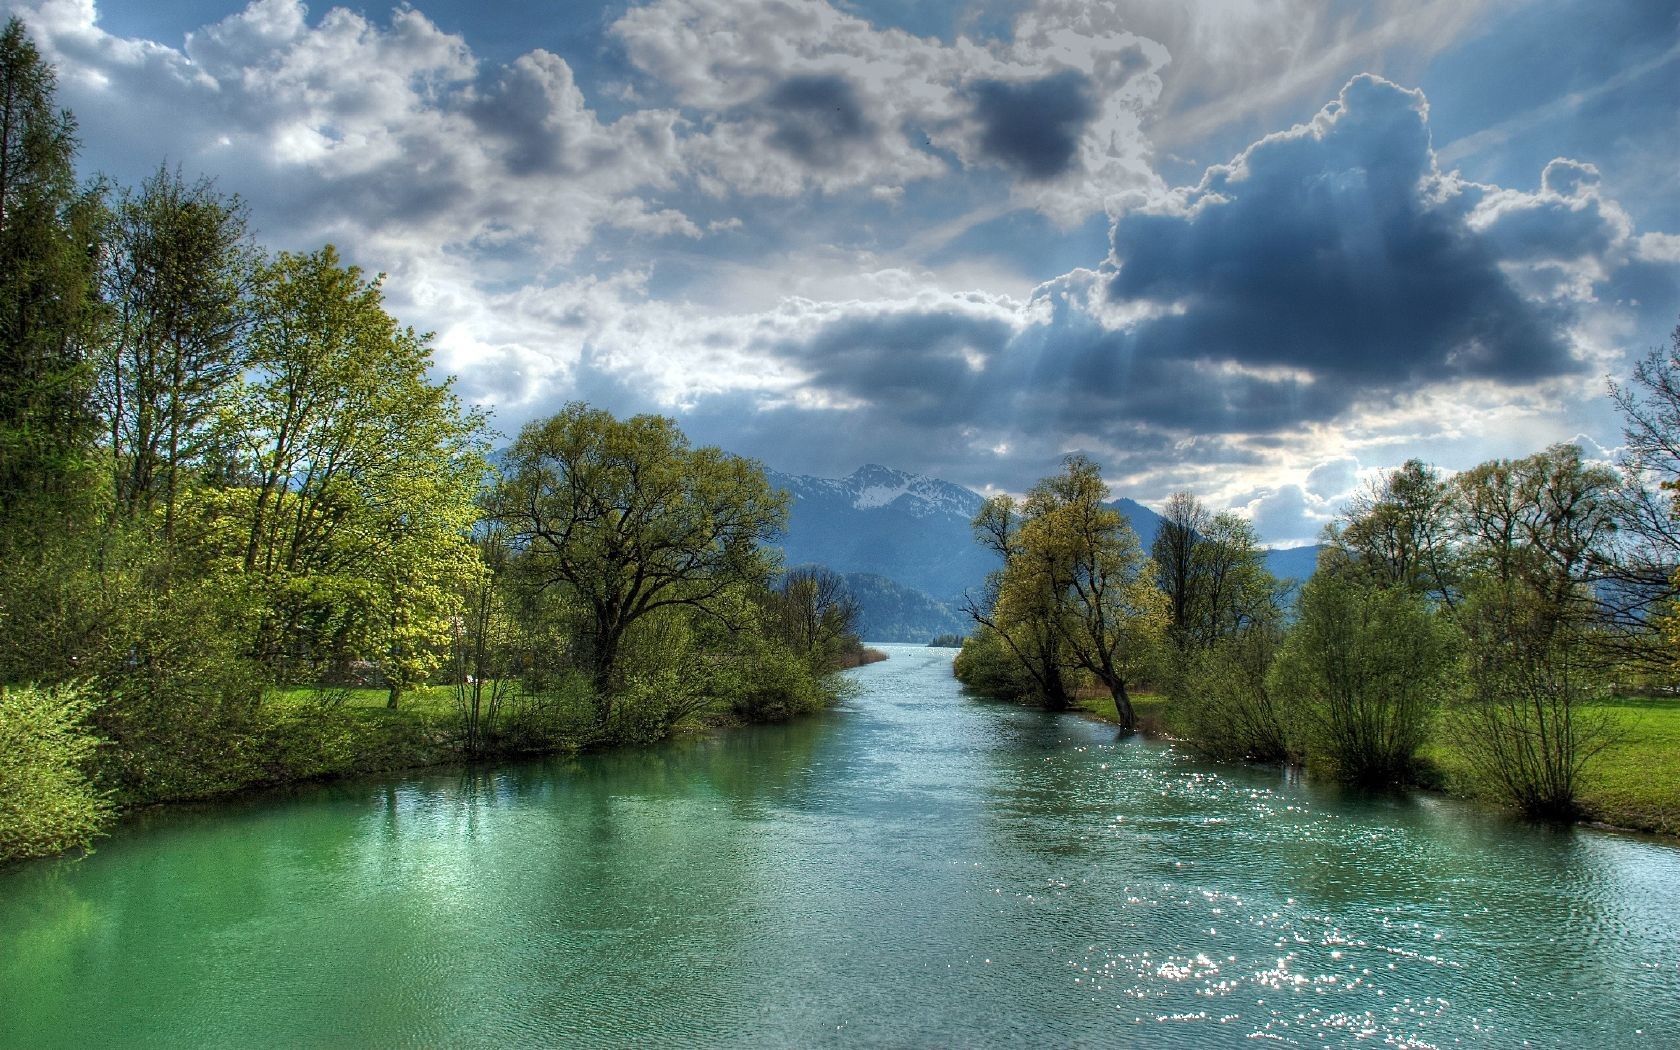 General 1680x1050 landscape water river clouds trees sky outdoors plants